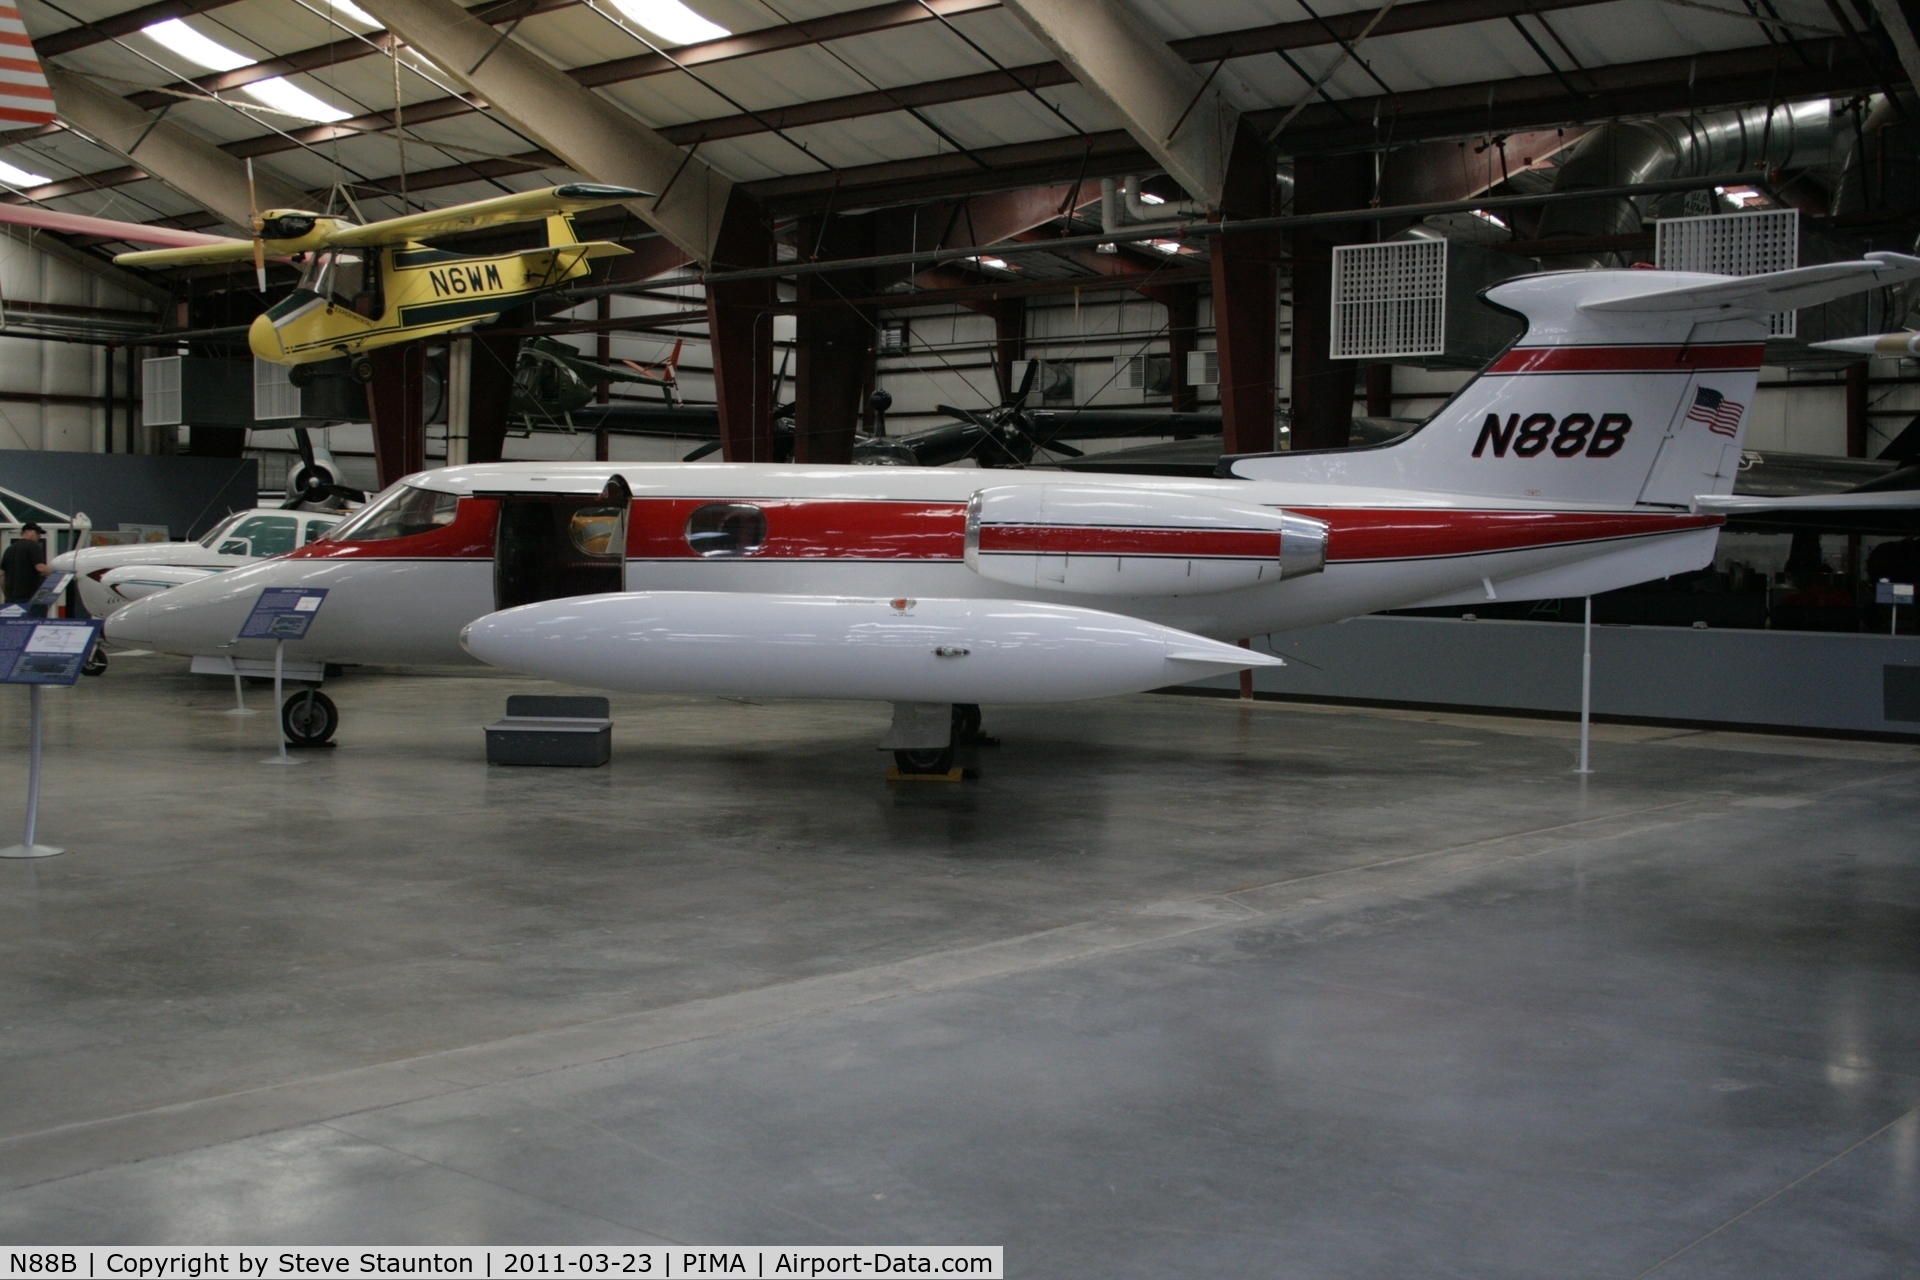 N88B, 1965 Learjet 23 C/N 23-015, Taken at Pima Air and Space Museum, in March 2011 whilst on an Aeroprint Aviation tour